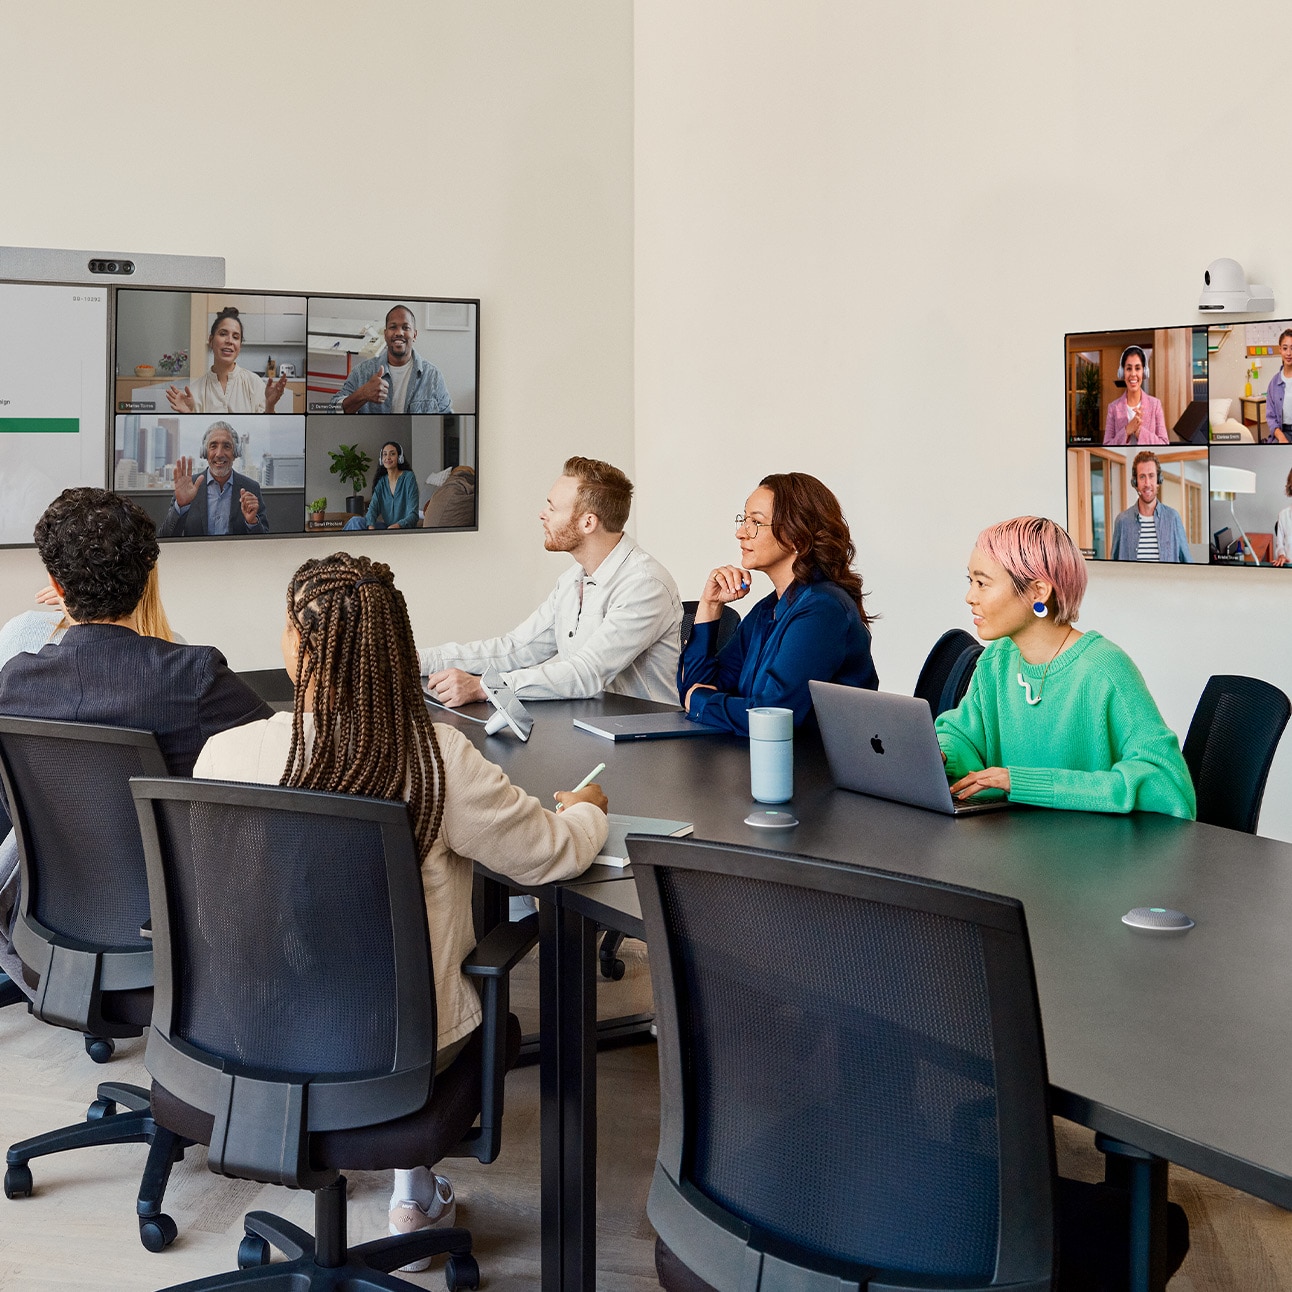 Six people collaborating in a conference room. The Cisco Quad Camera bar is mounted on the wall above dual external displays showing shared content and remote participants of a live video meeting. The Cisco PTZ 4K Camera is mounted on the sidewall above an external display showing remote meeting participants. The team is using collaboration peripherals including the tabletop Cisco Room Navigator room controller and two Cisco Table Microphone Pro devices placed on top of the table surface.